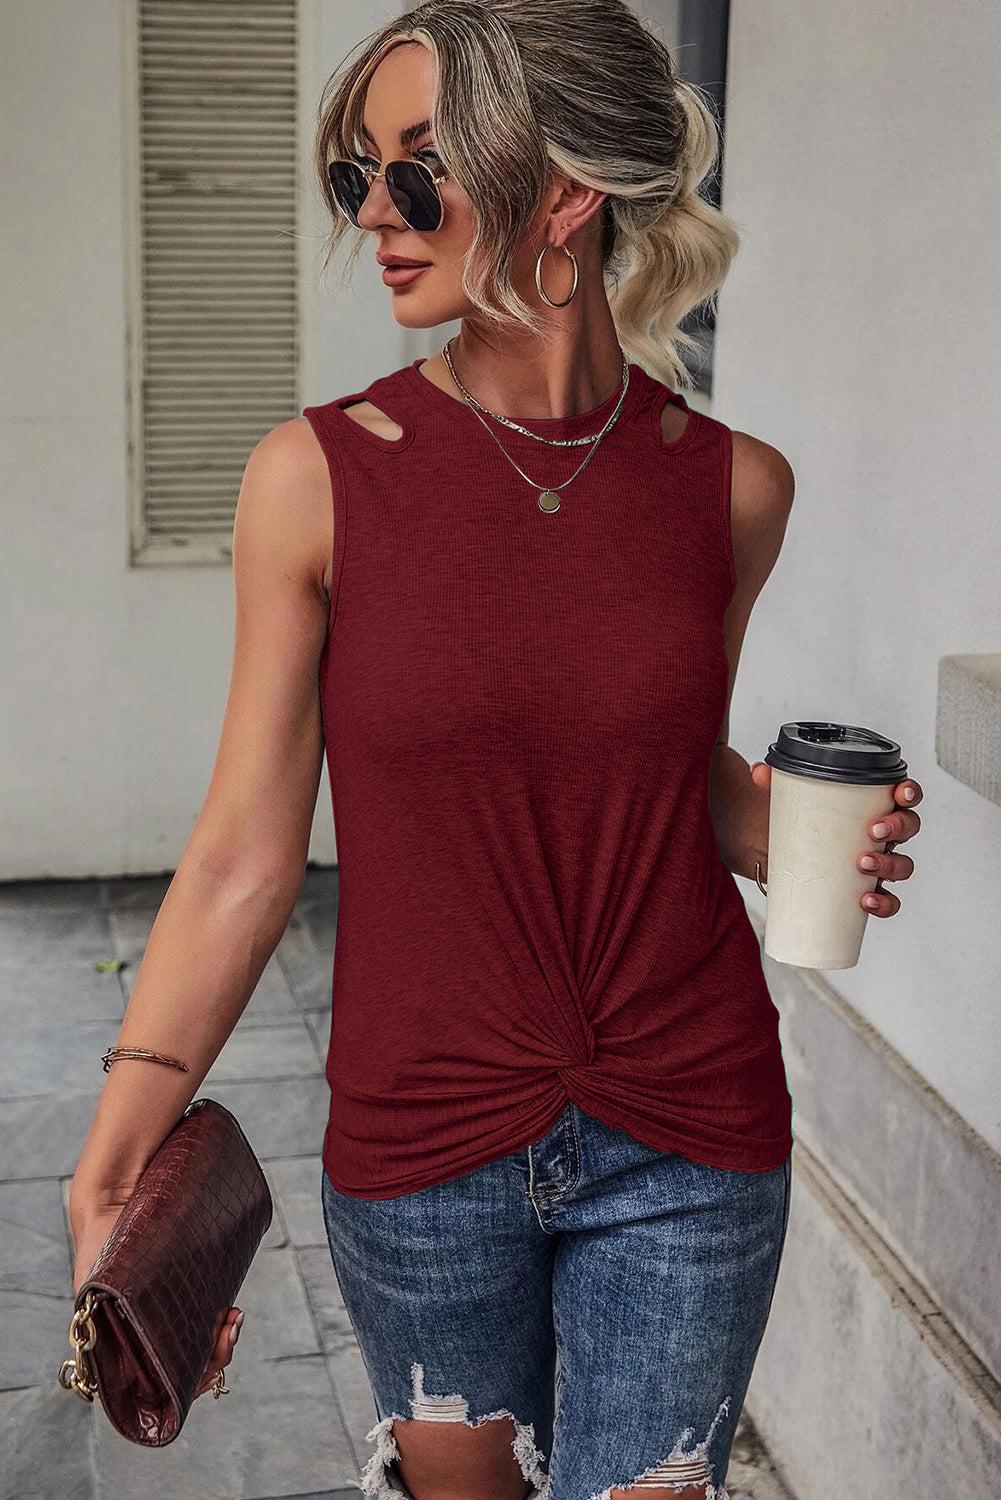 Rib Knit Cut-out Front Twist Sleeveless Tops MTO0192